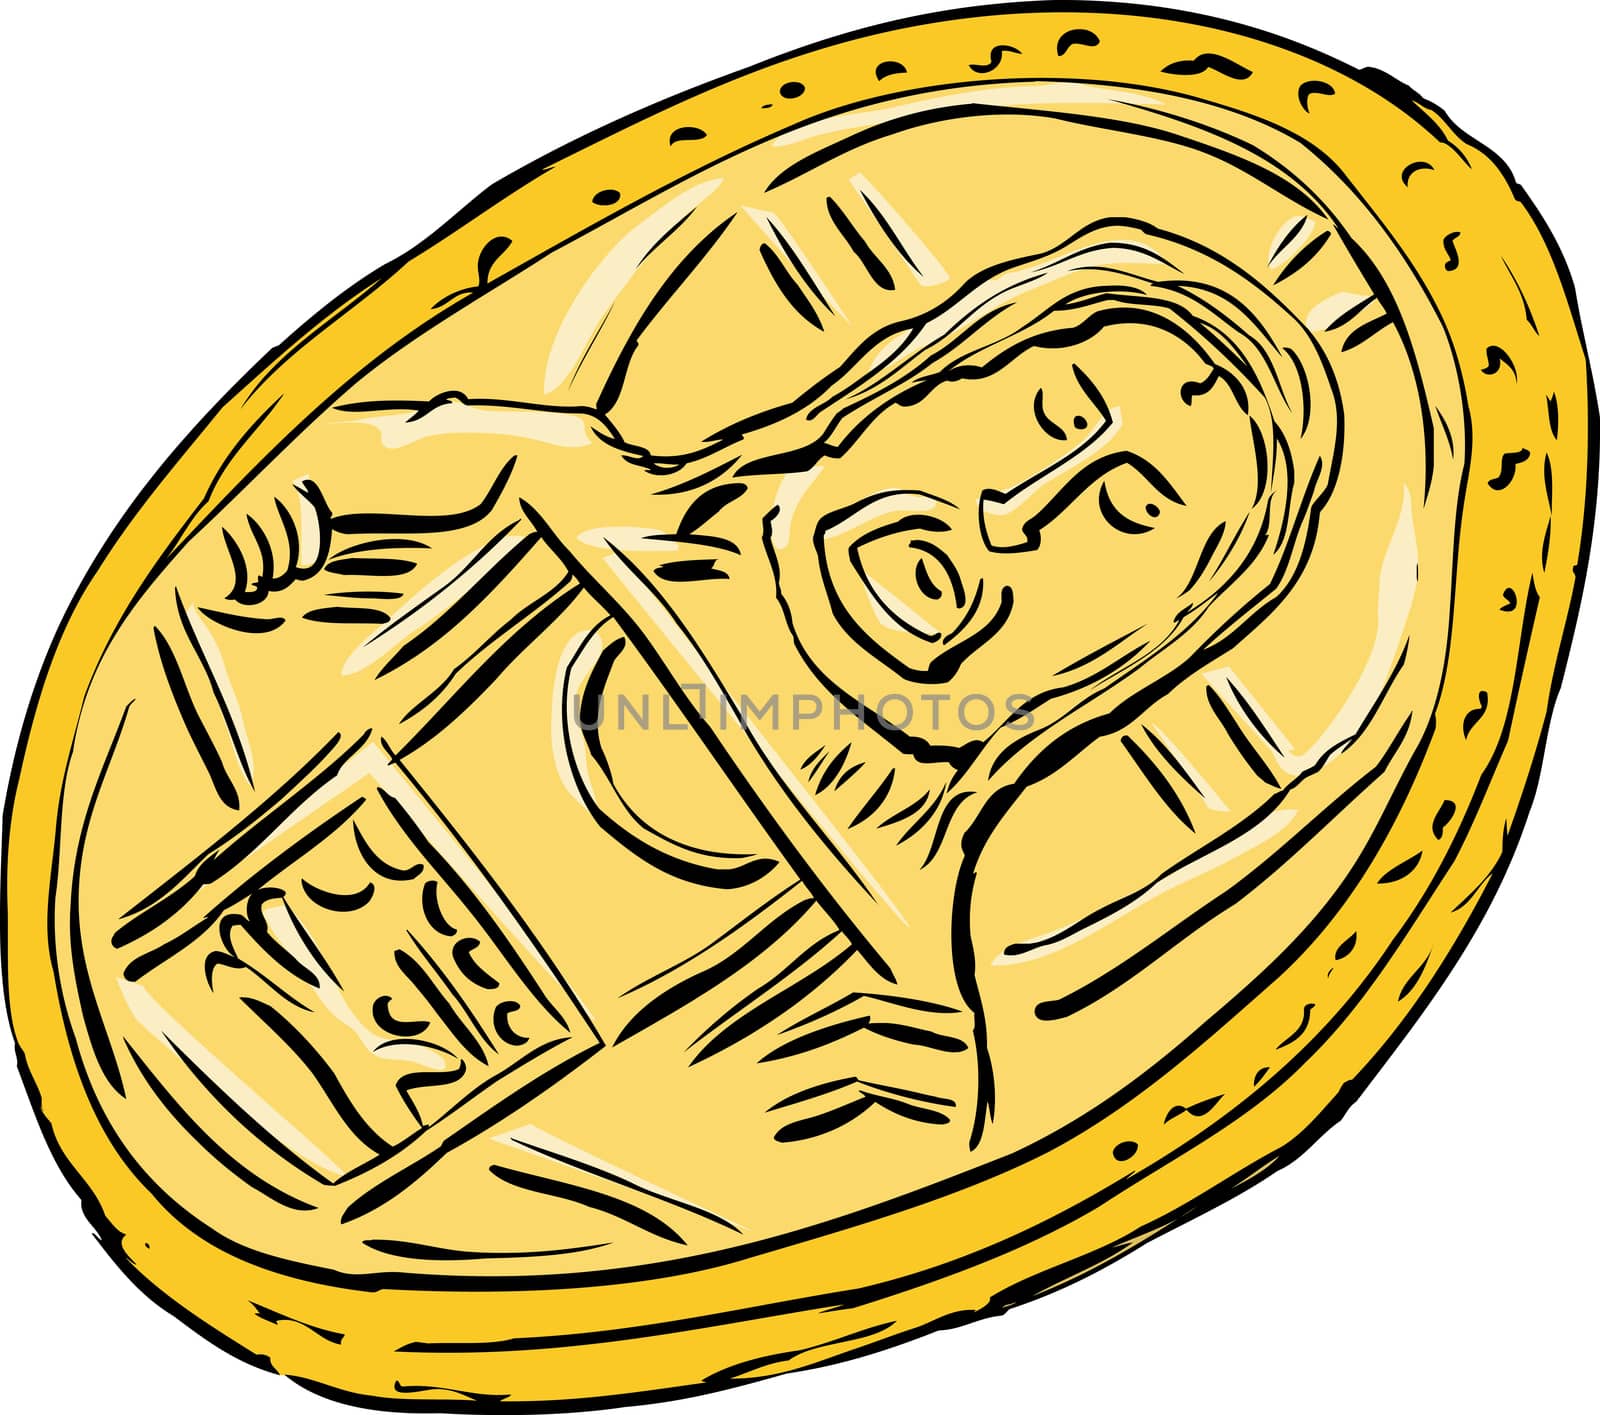 Cartoon of single Histamenon gold coin from the Byzantine Empire over white